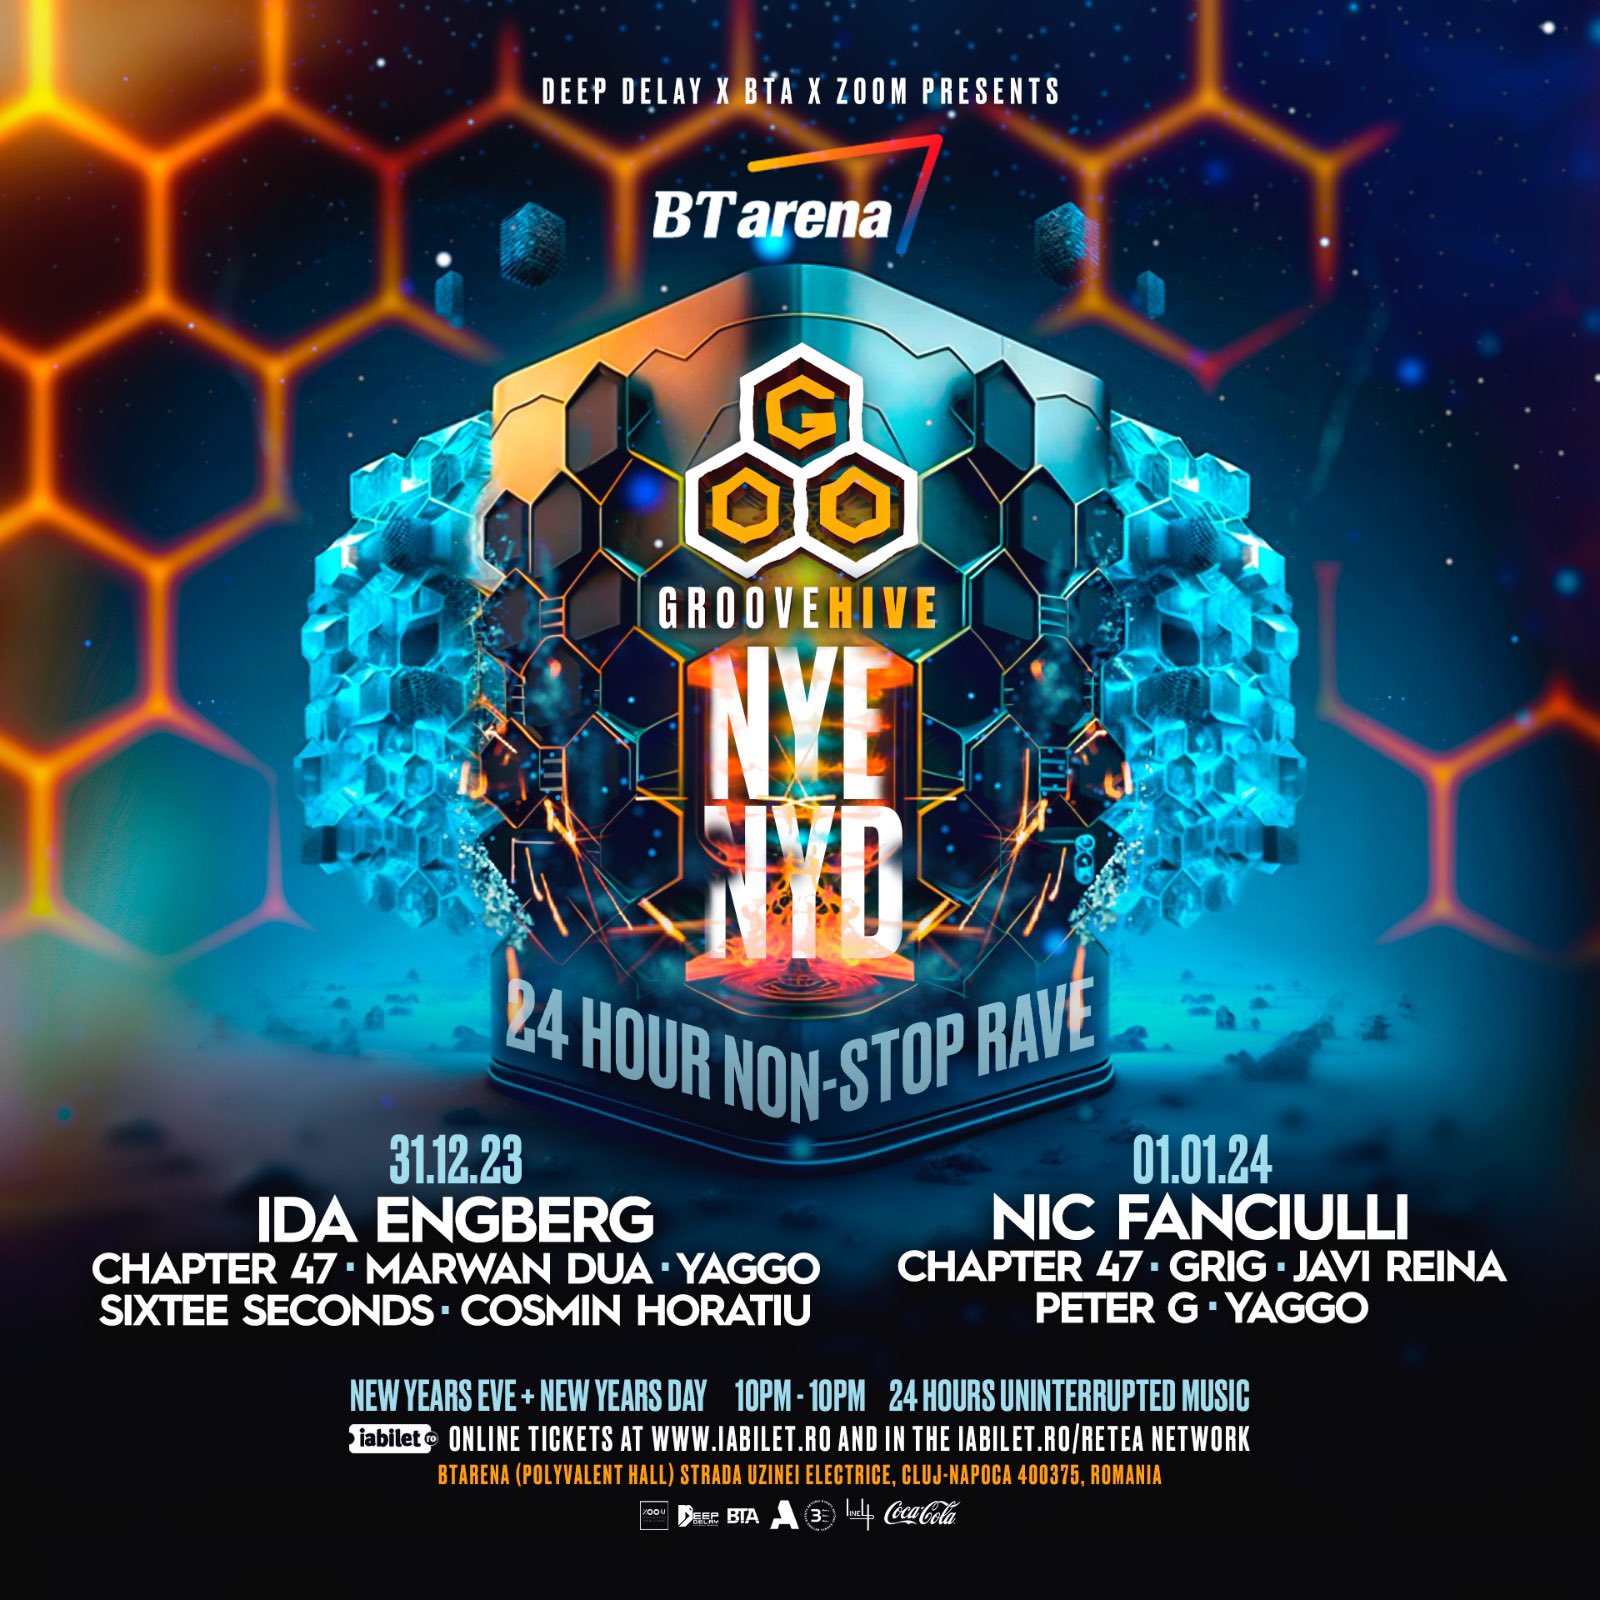 CLUJ!! GET READY FOR GROOVE HIVE TO TAKE OVER THE BTARENA ON NEW YEAR’S